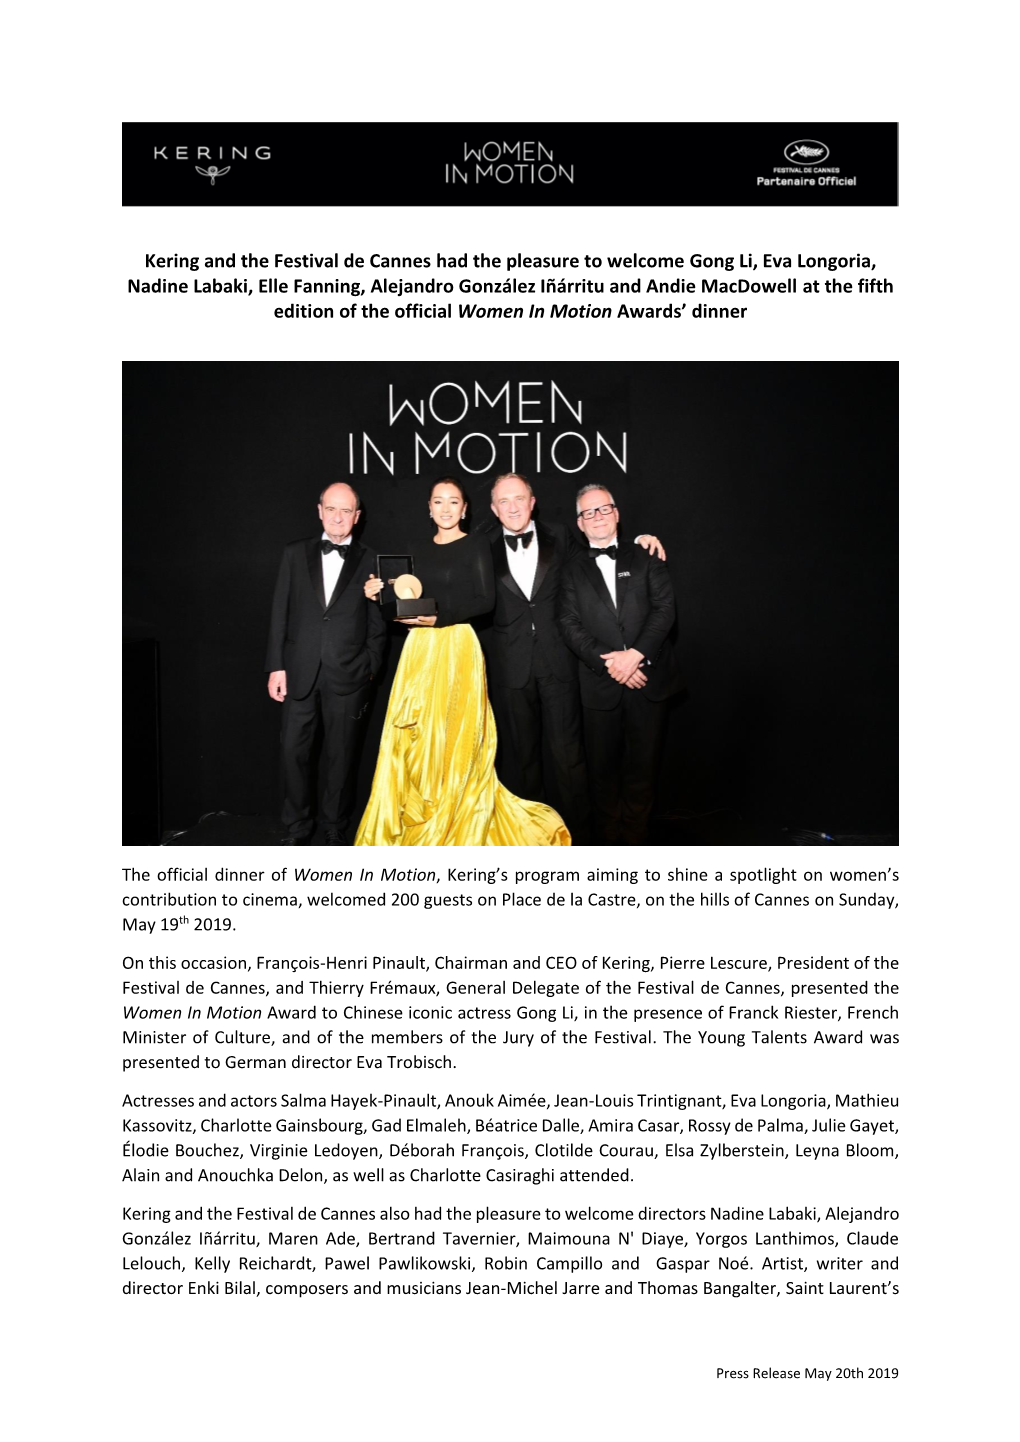 Kering and the Festival De Cannes Had the Pleasure to Welcome Gong